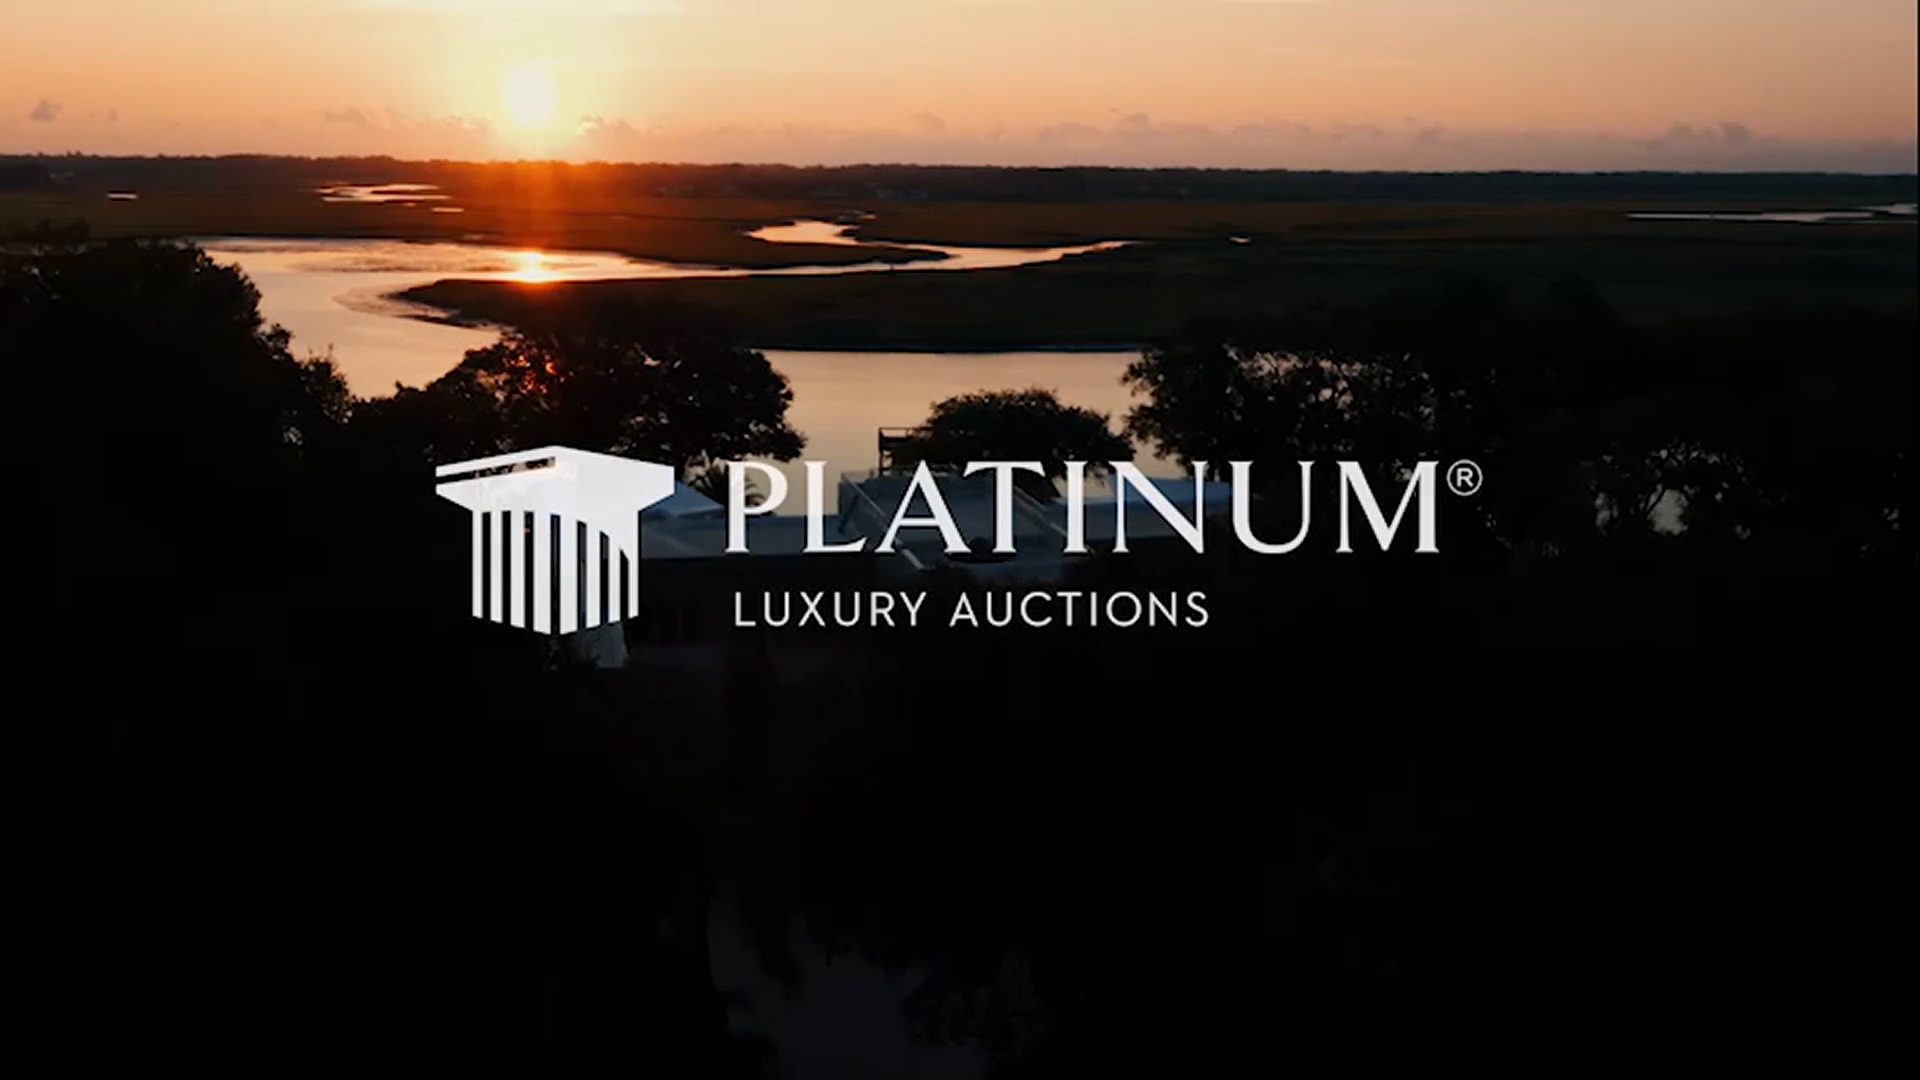 This luxe estate, boasting 4.7 acres on Florida’s Intracoastal Waterway, will be sold to the highest bidder at a luxury auction® without reserve scheduled for October 27. The coastal Jacksonville property initially asked $9 million, and offers 170 ft of waterfrontage, a private boat dock, and direct access to the Atlantic Ocean. It’s also just 15 mins from the famous TPC Sawgrass golf course, home to the PGA’s Player’s Championship. Platinum Luxury Auctions is managing the sale. WaterfrontLuxuryAuction.com.